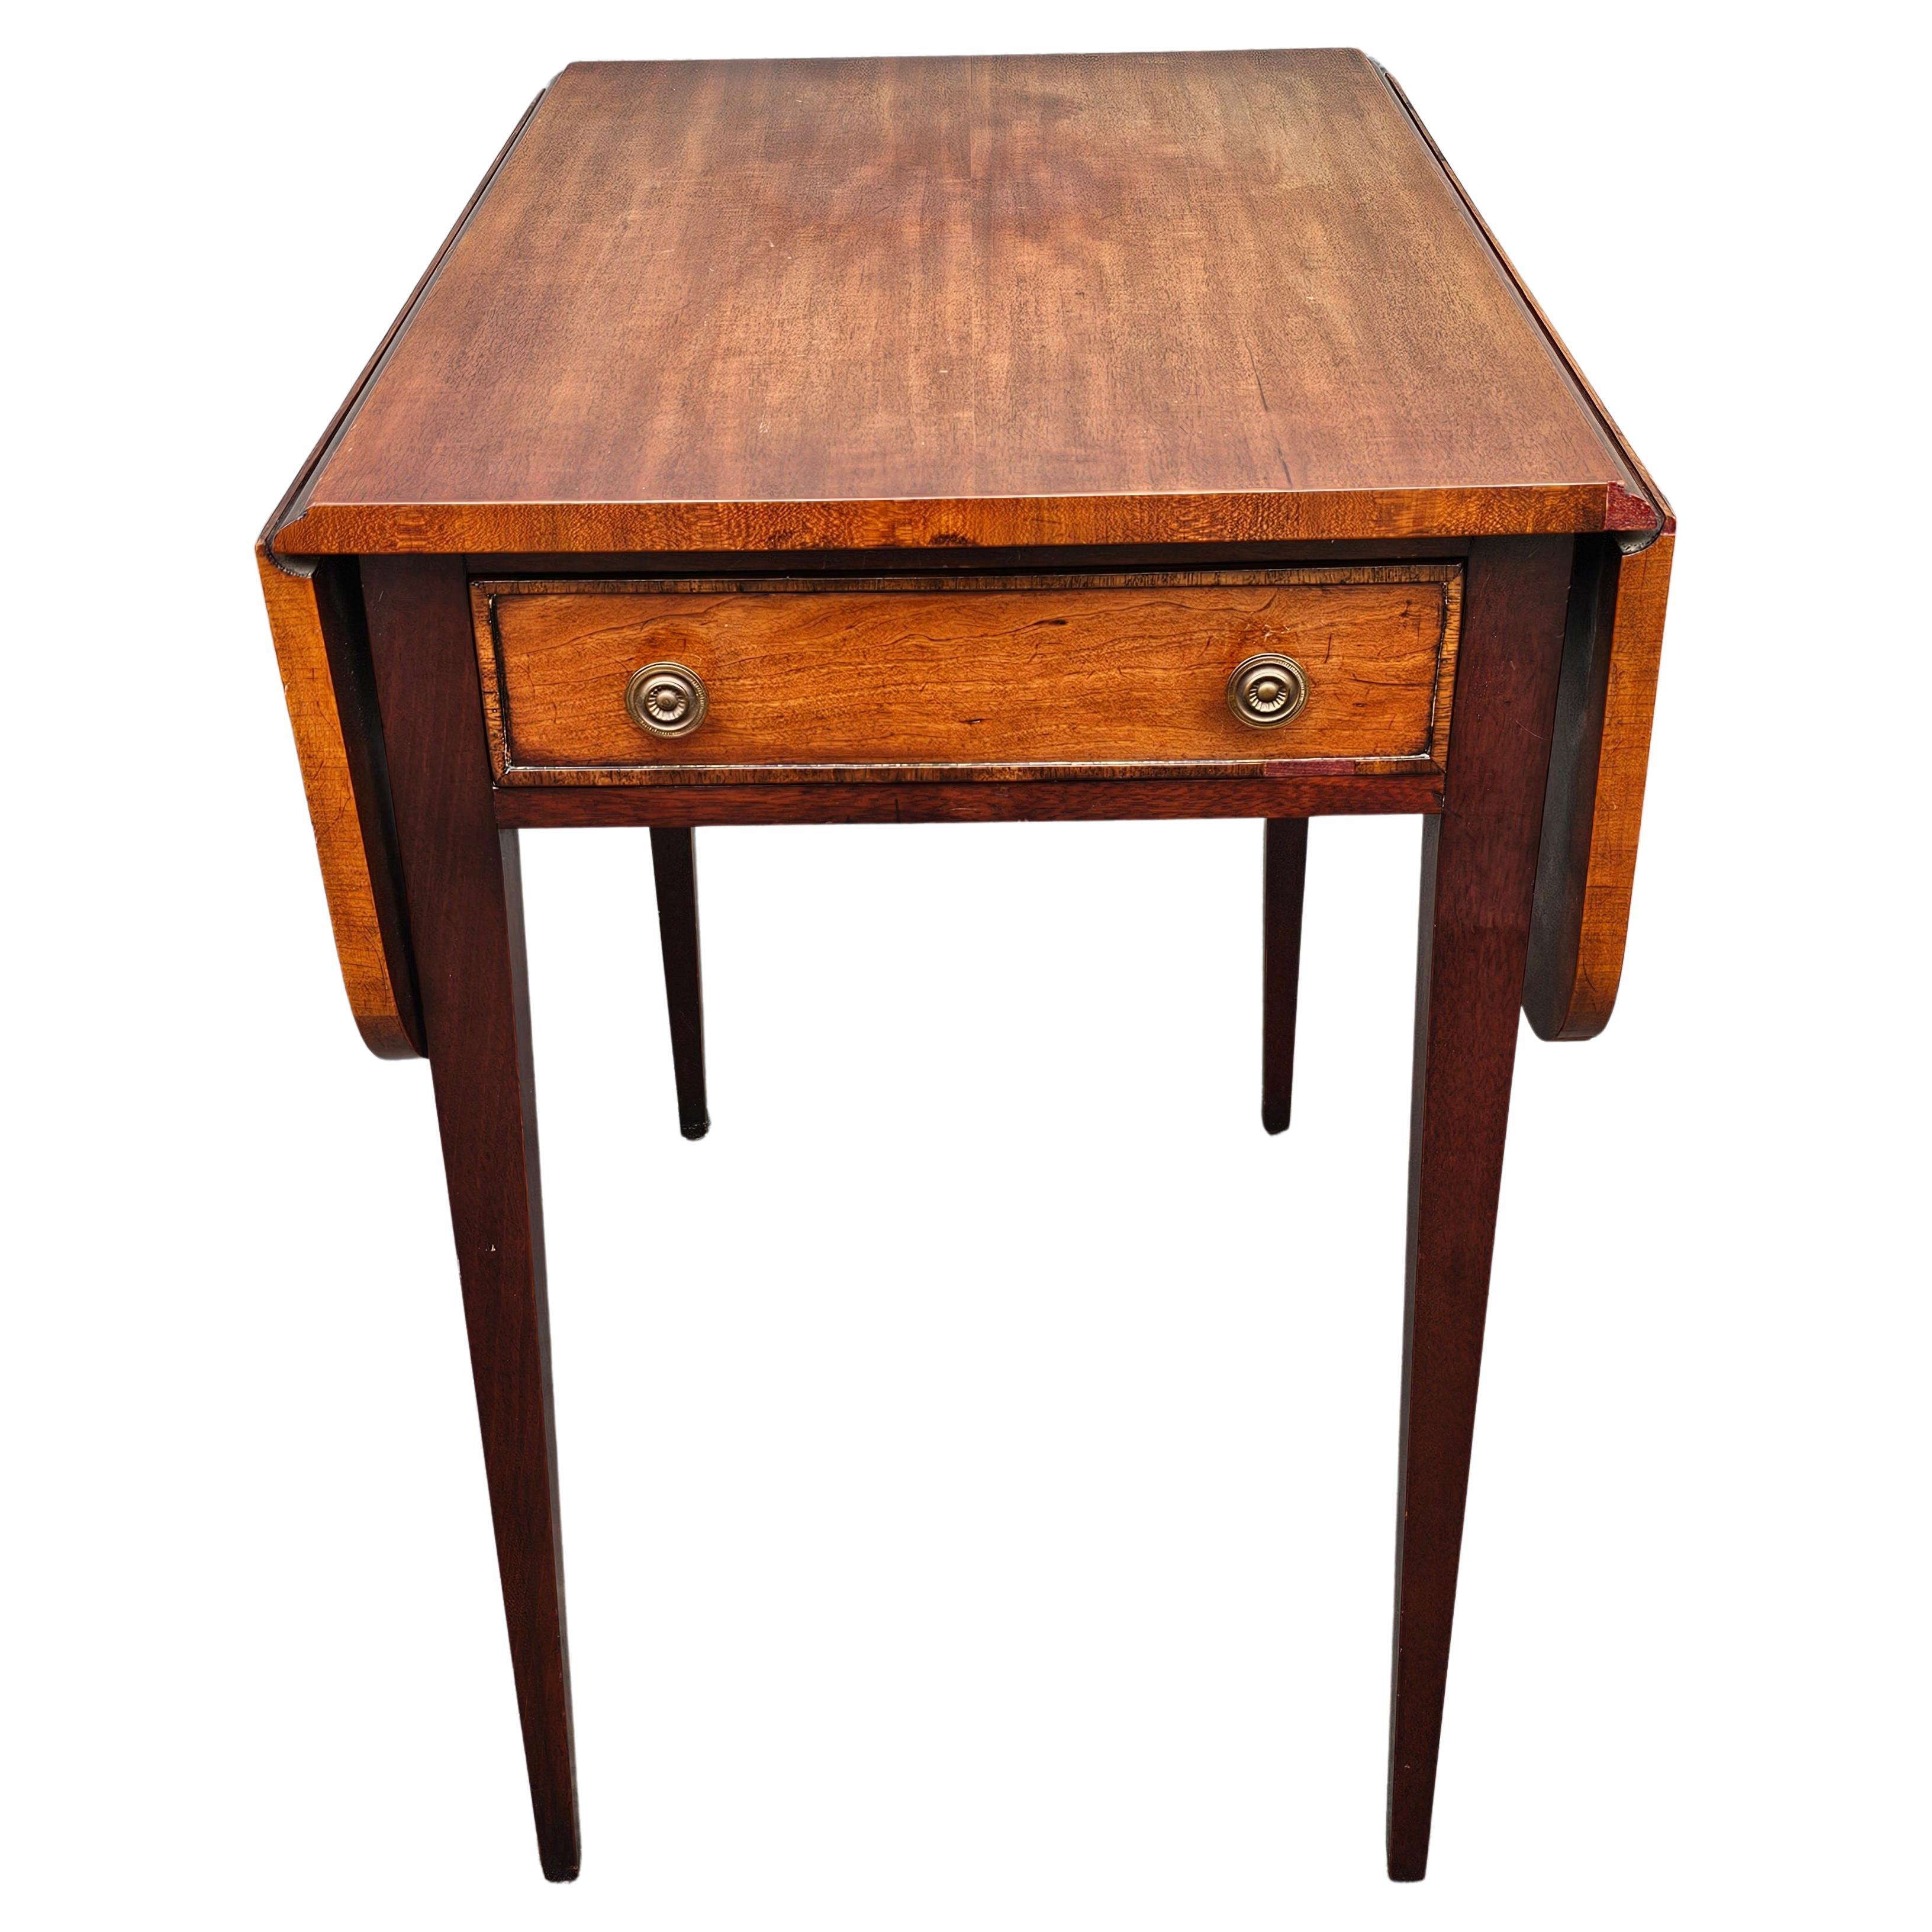 19th Century Federal Style Mahogany Pembroke Table For Sale